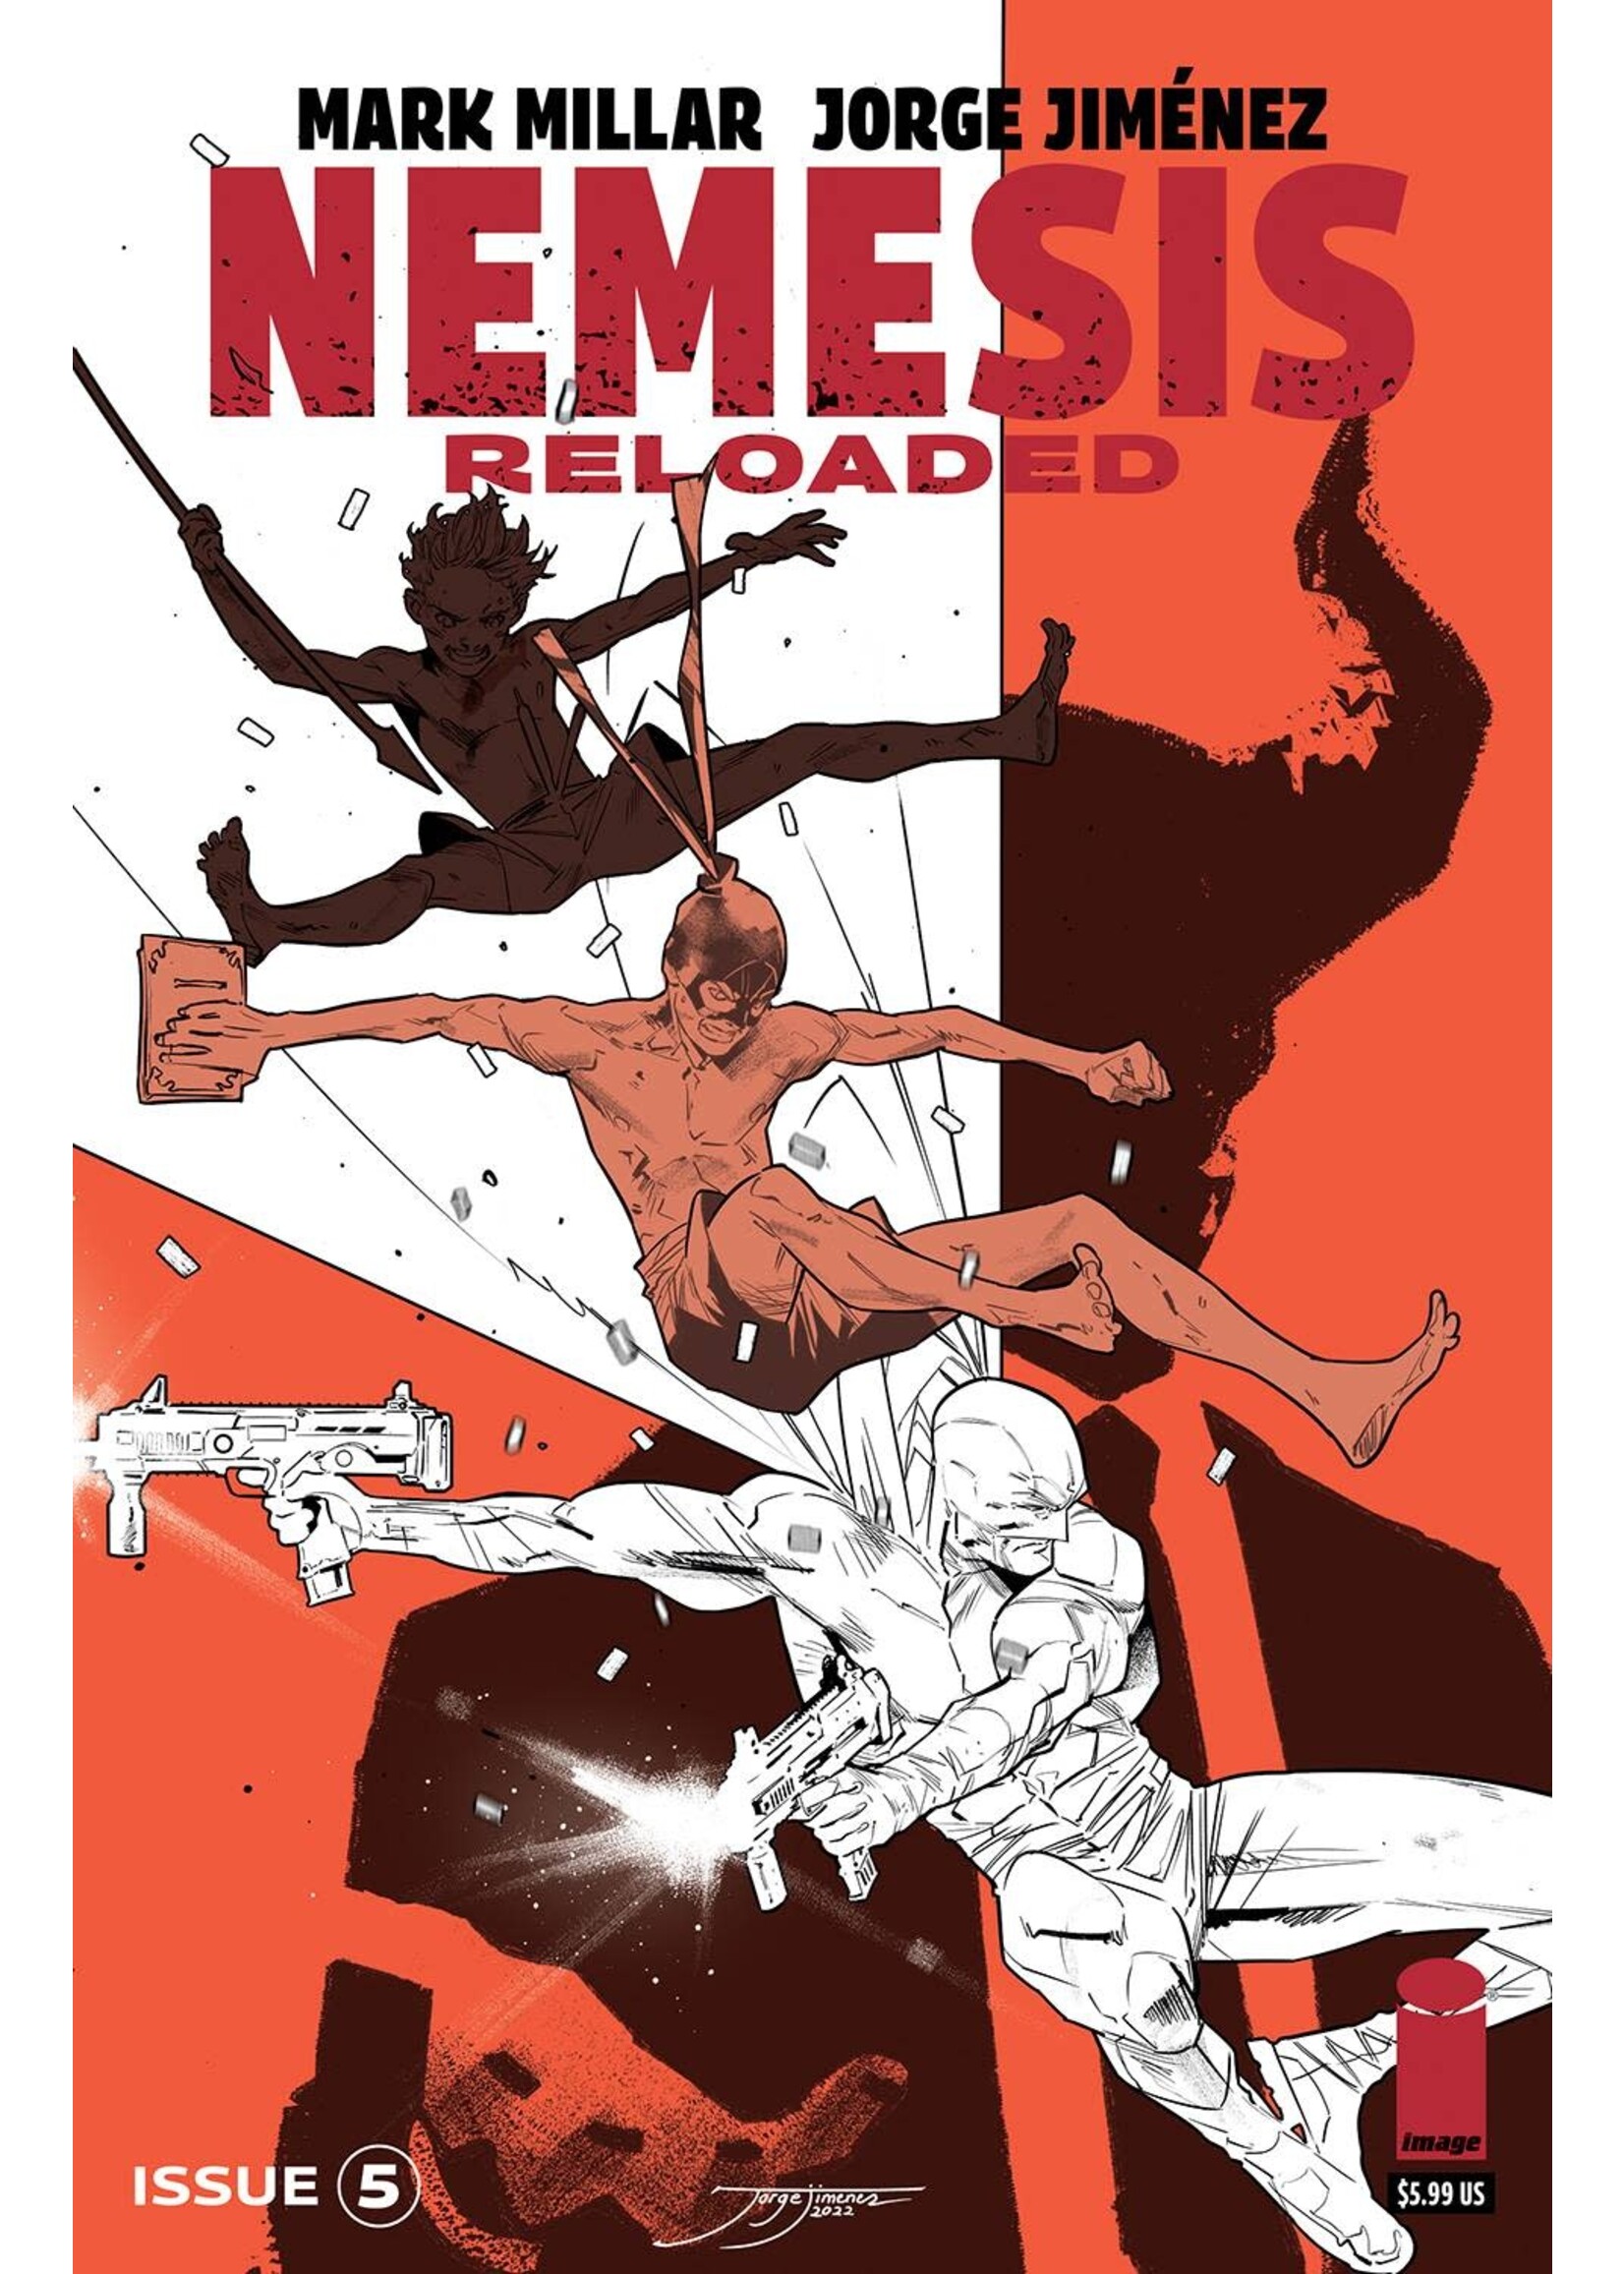 IMAGE COMICS NEMESIS RELOADED complete 5 issue series